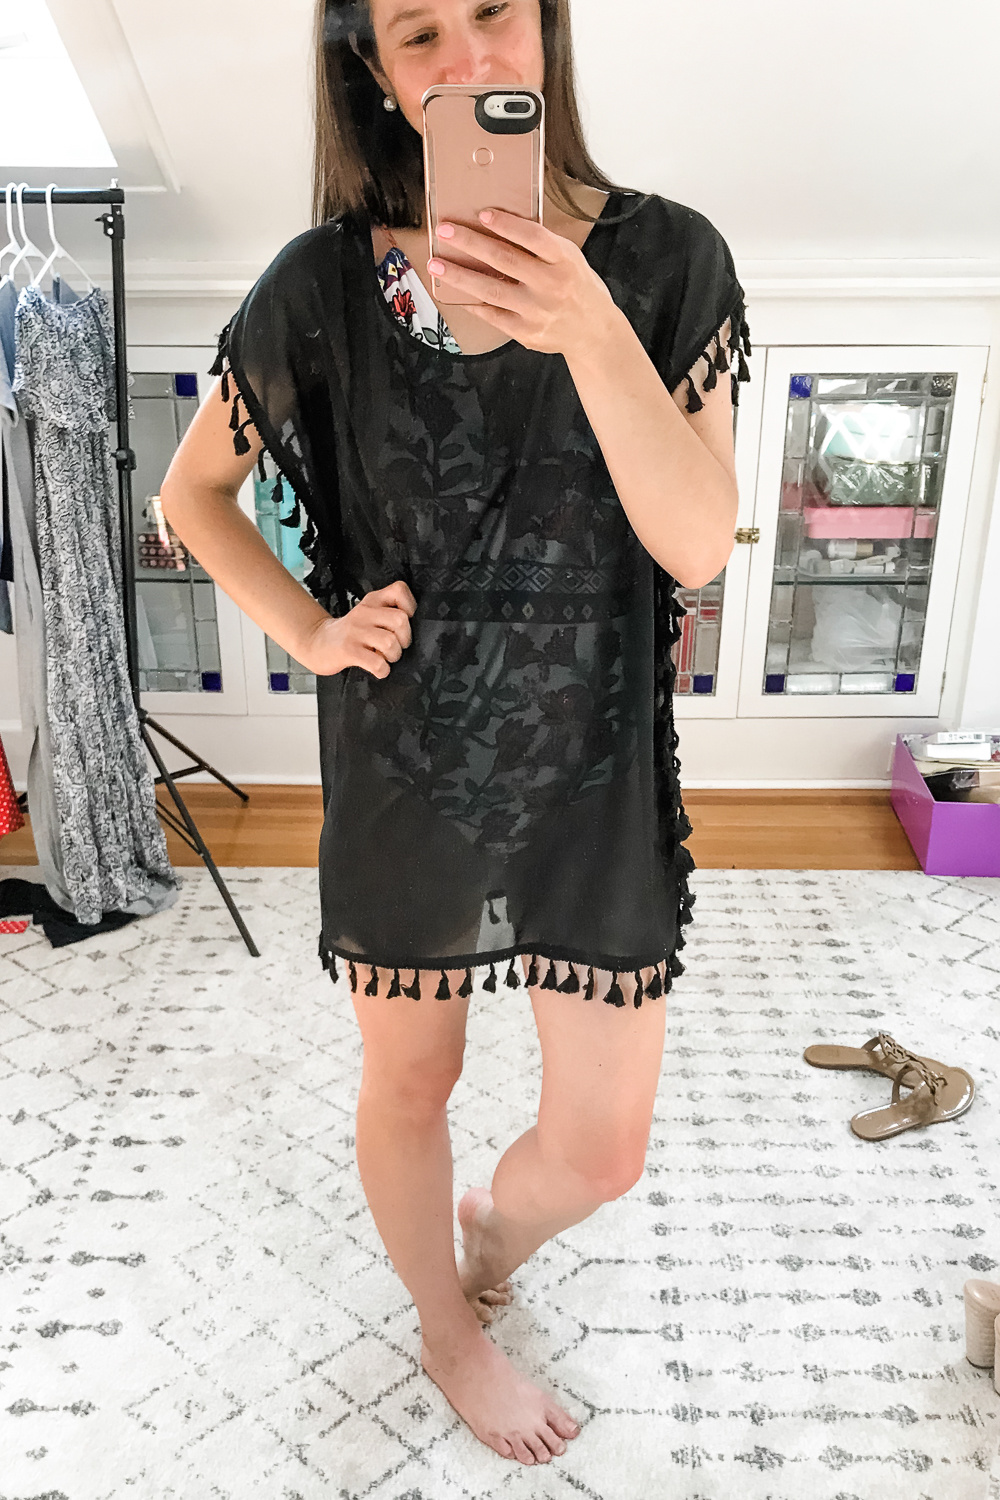 Black GDKEY Chiffon Tassel Cover-Up on Amazon, Amazon Summer Try-On Haul and Style Picks by popular affordable fashion blogger Stephanie Ziajka from Diary of a Debutante